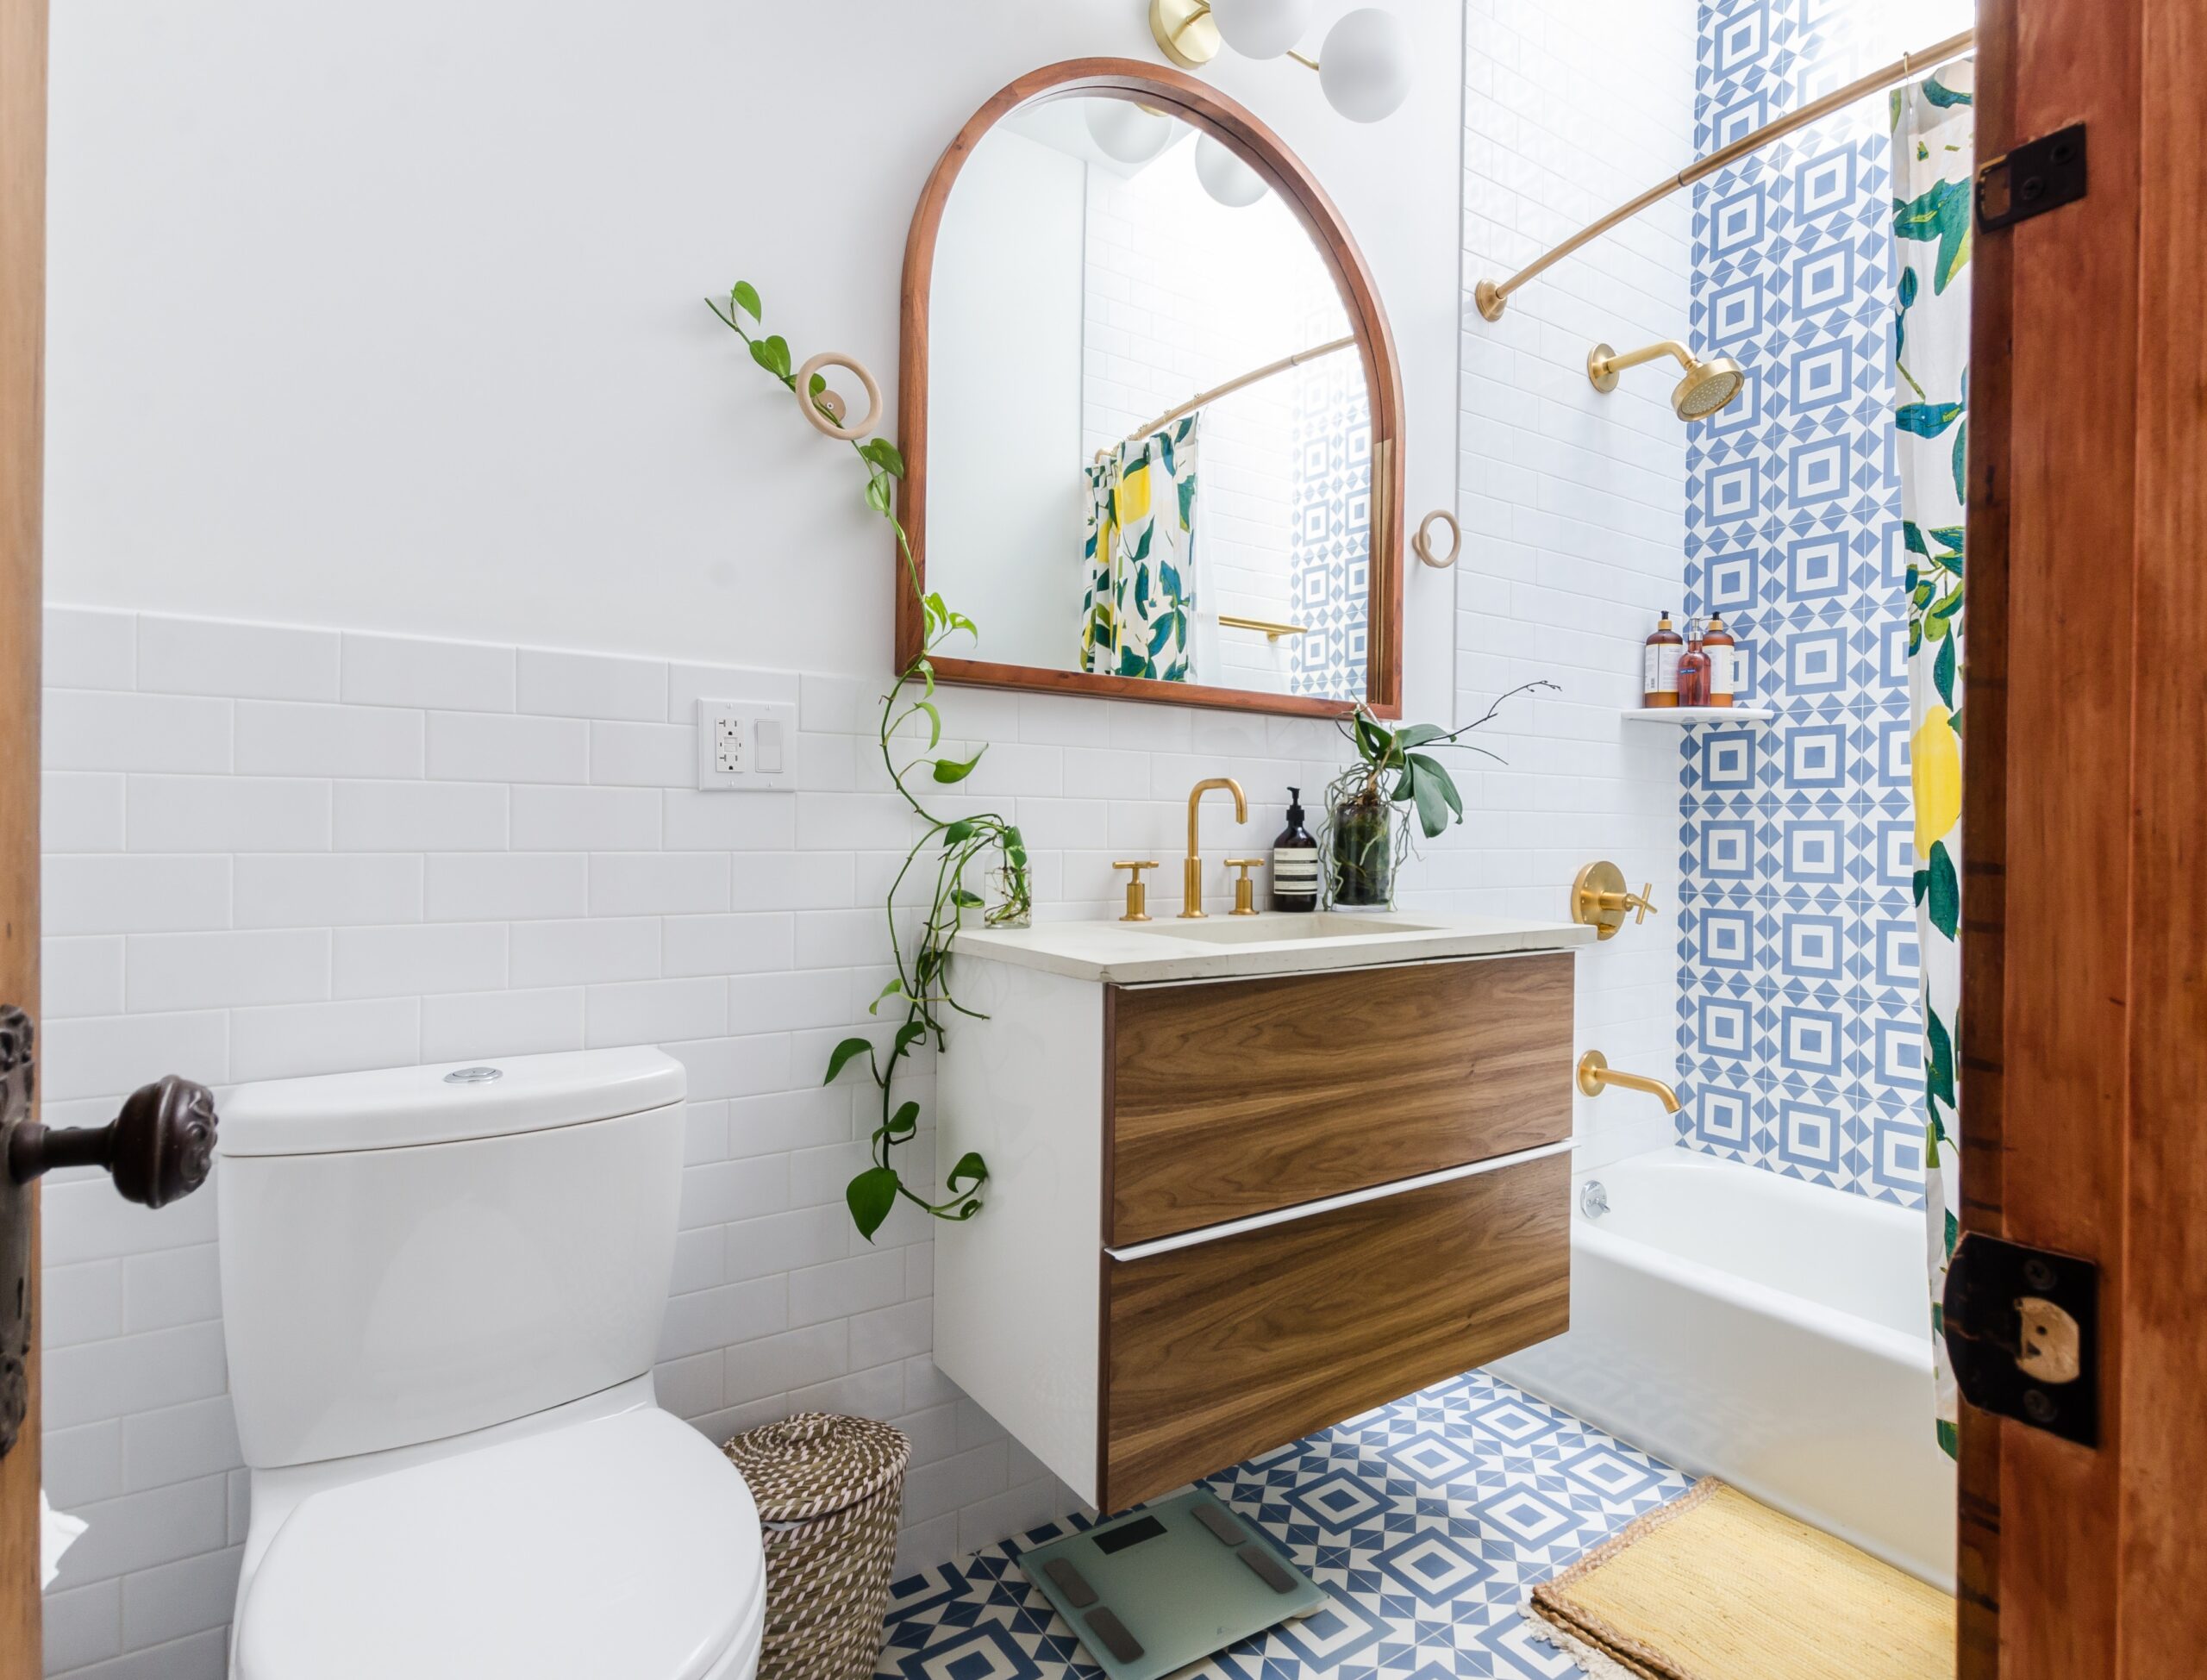 Create an accent wall using tile for a boho bathroom. Pictured: A bathroom with an accent tile wall and decor.